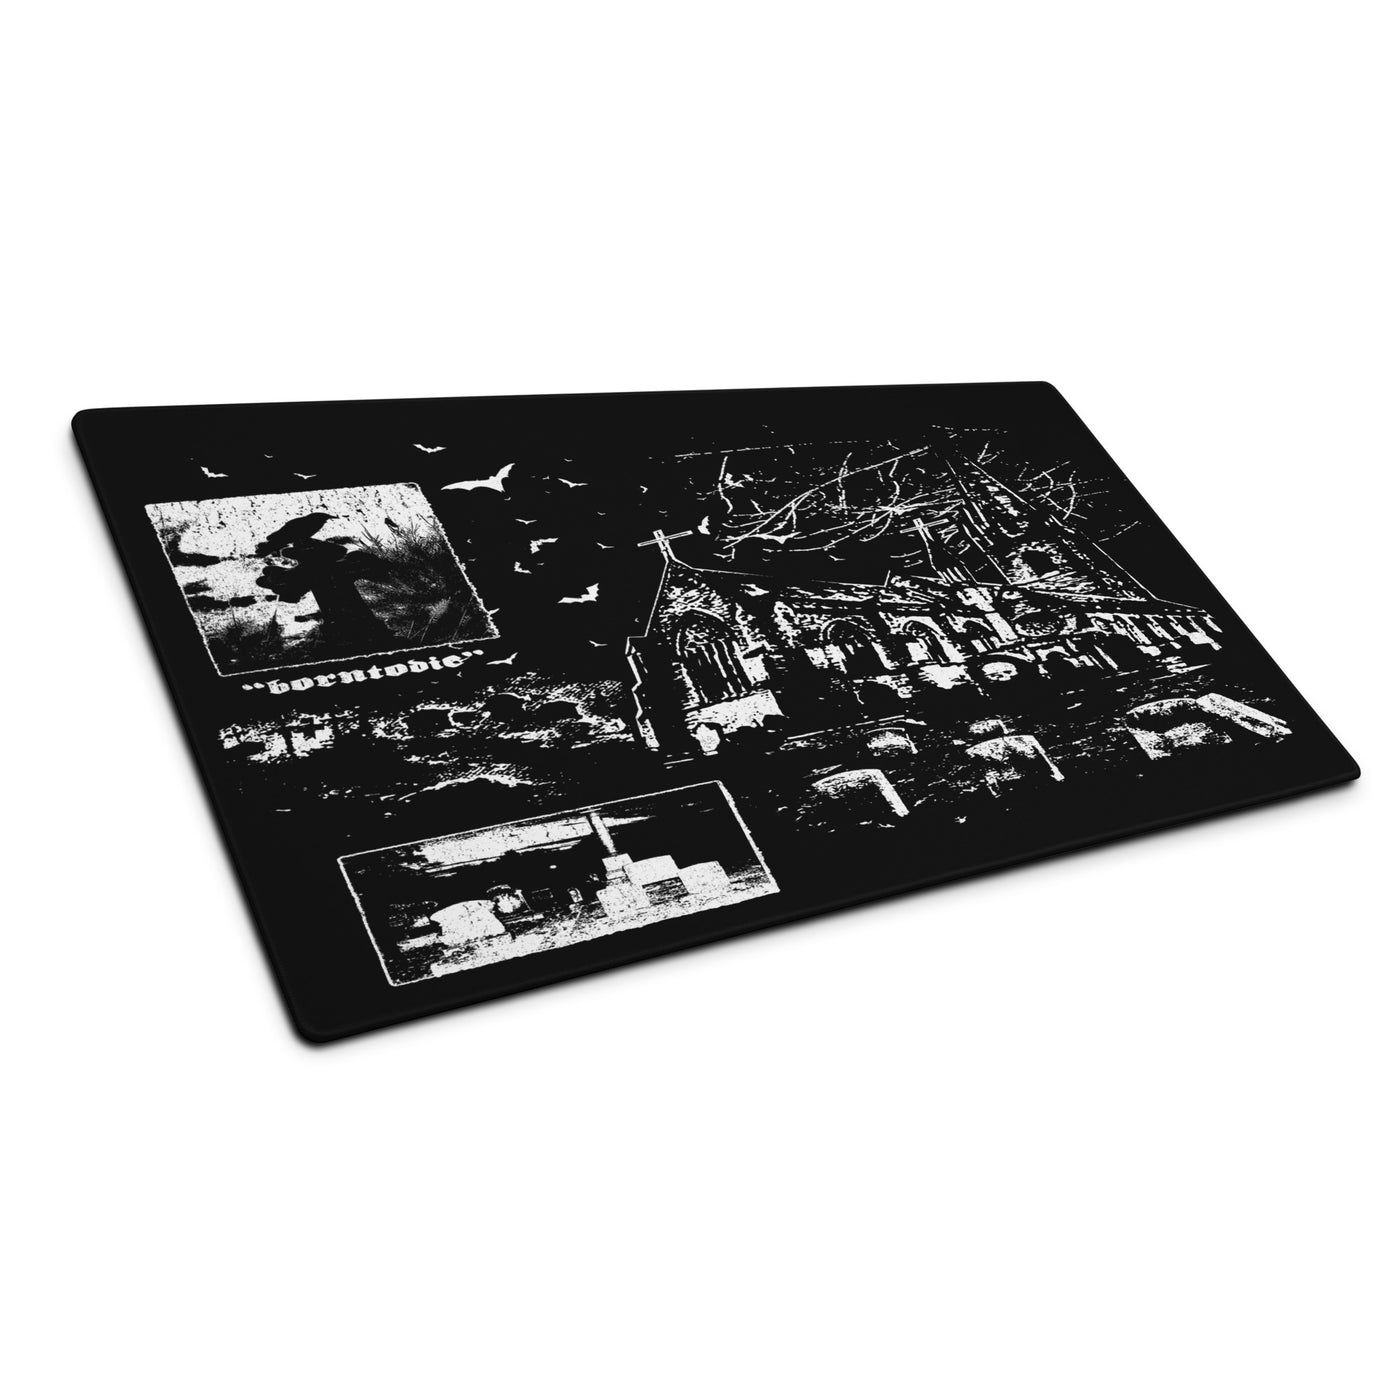 "borntodie' Large Mouse Pad